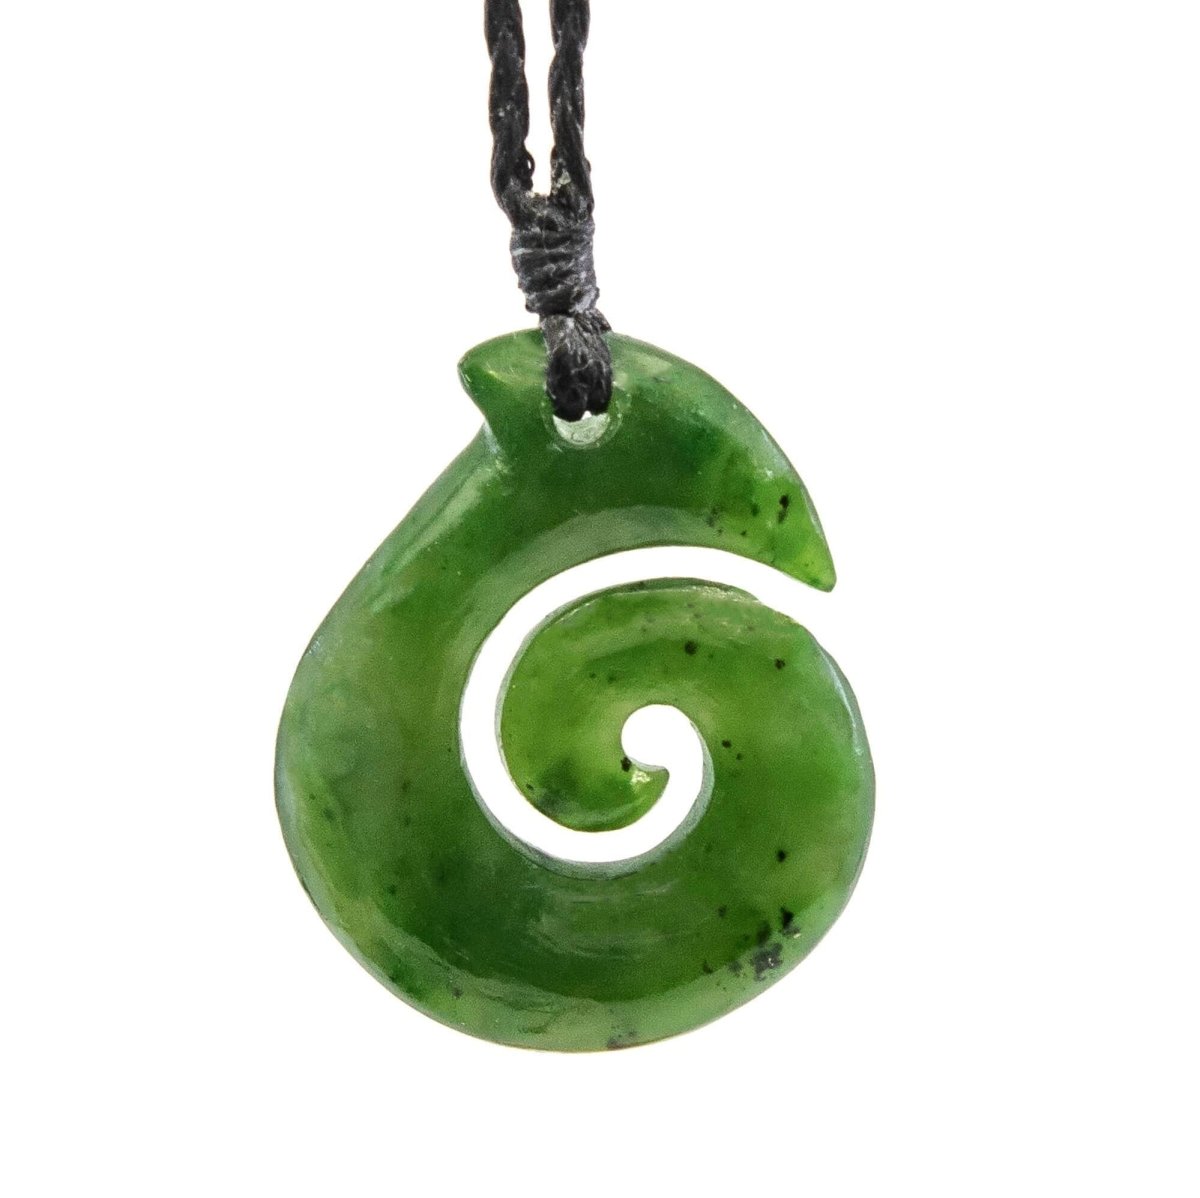 New Zealand Maori Inspired Nephrite Jade Fish Hook Necklace - Earthbound Pacific Black